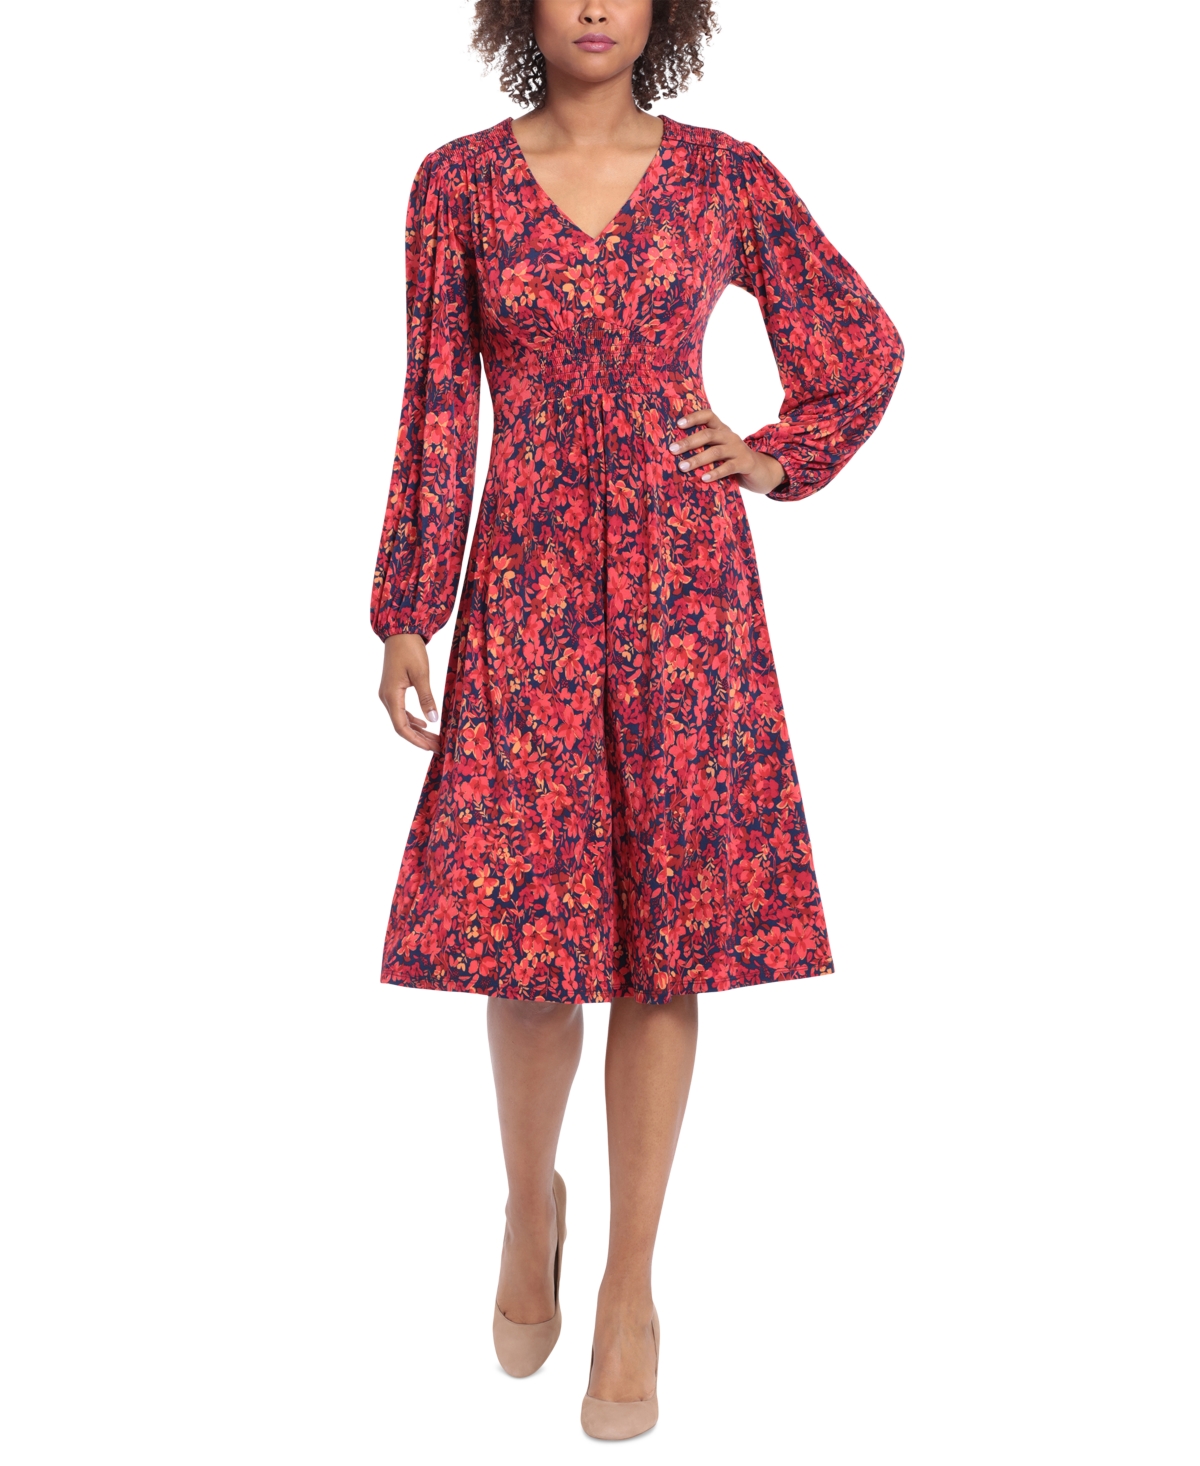 Women's Floral-Print Fit & Flare Dress - Navy/Red